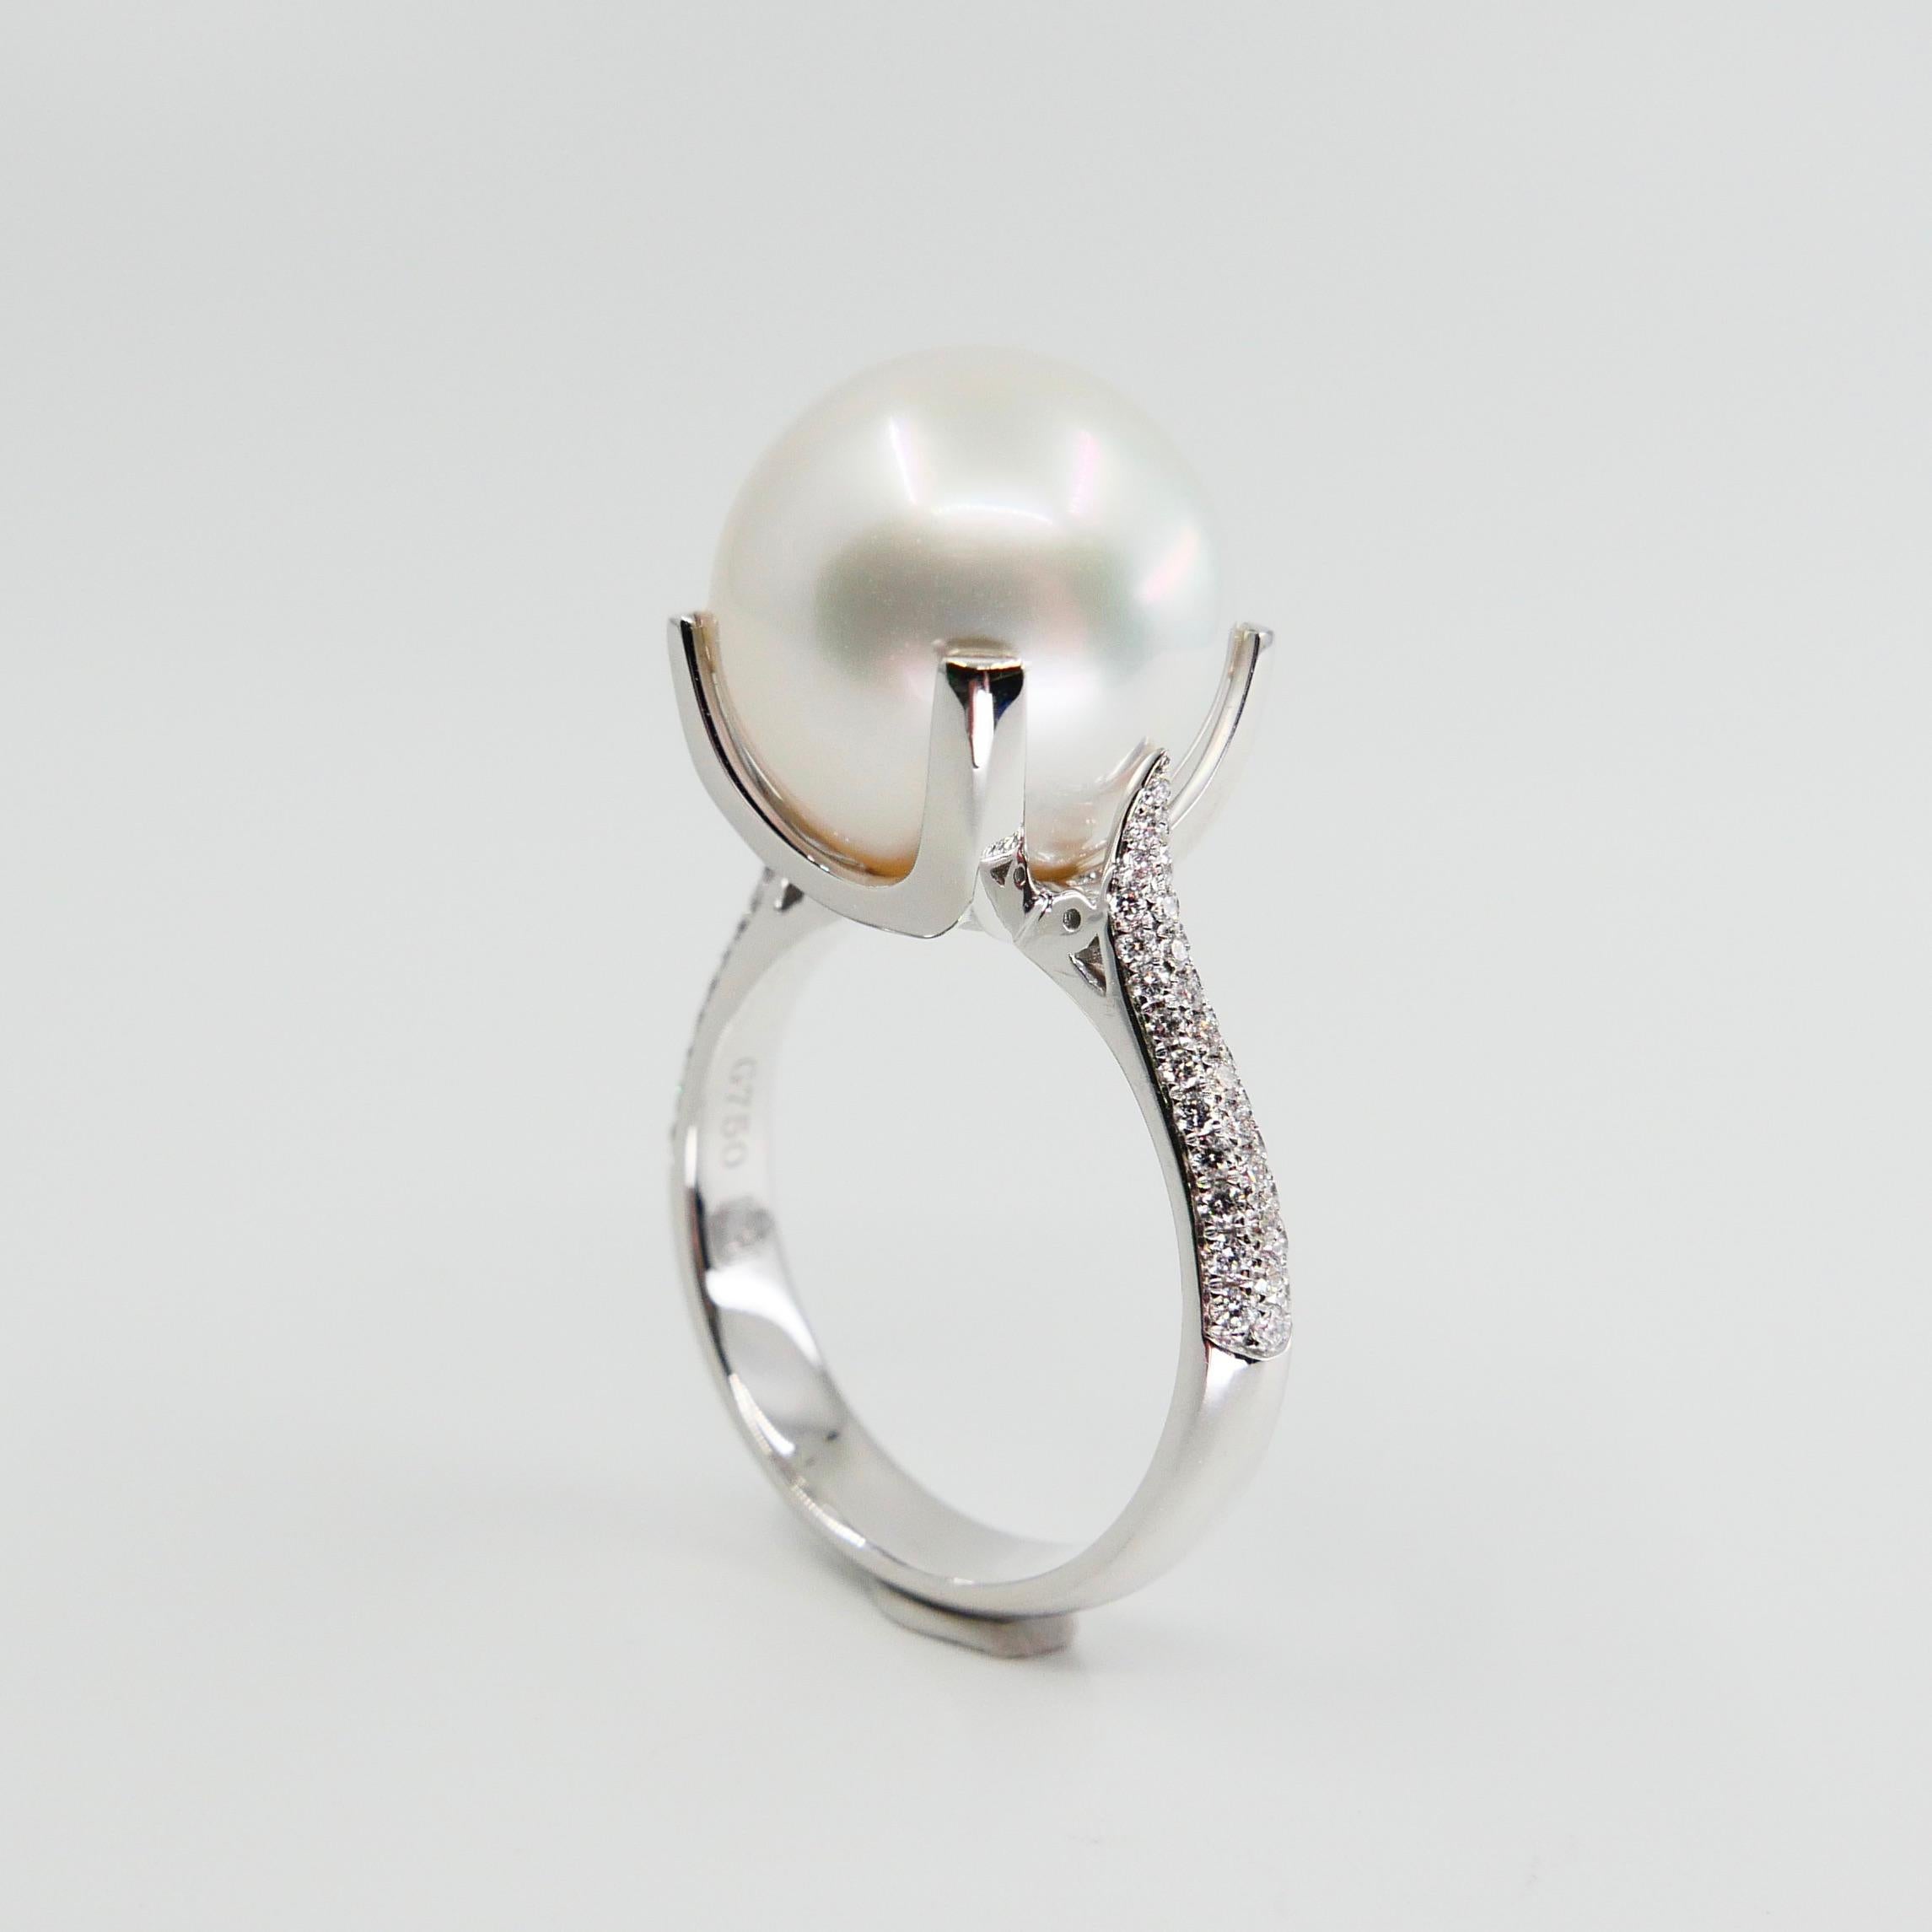 Certified South Sea Pearl and Diamond Ring, Our Signature Design 2